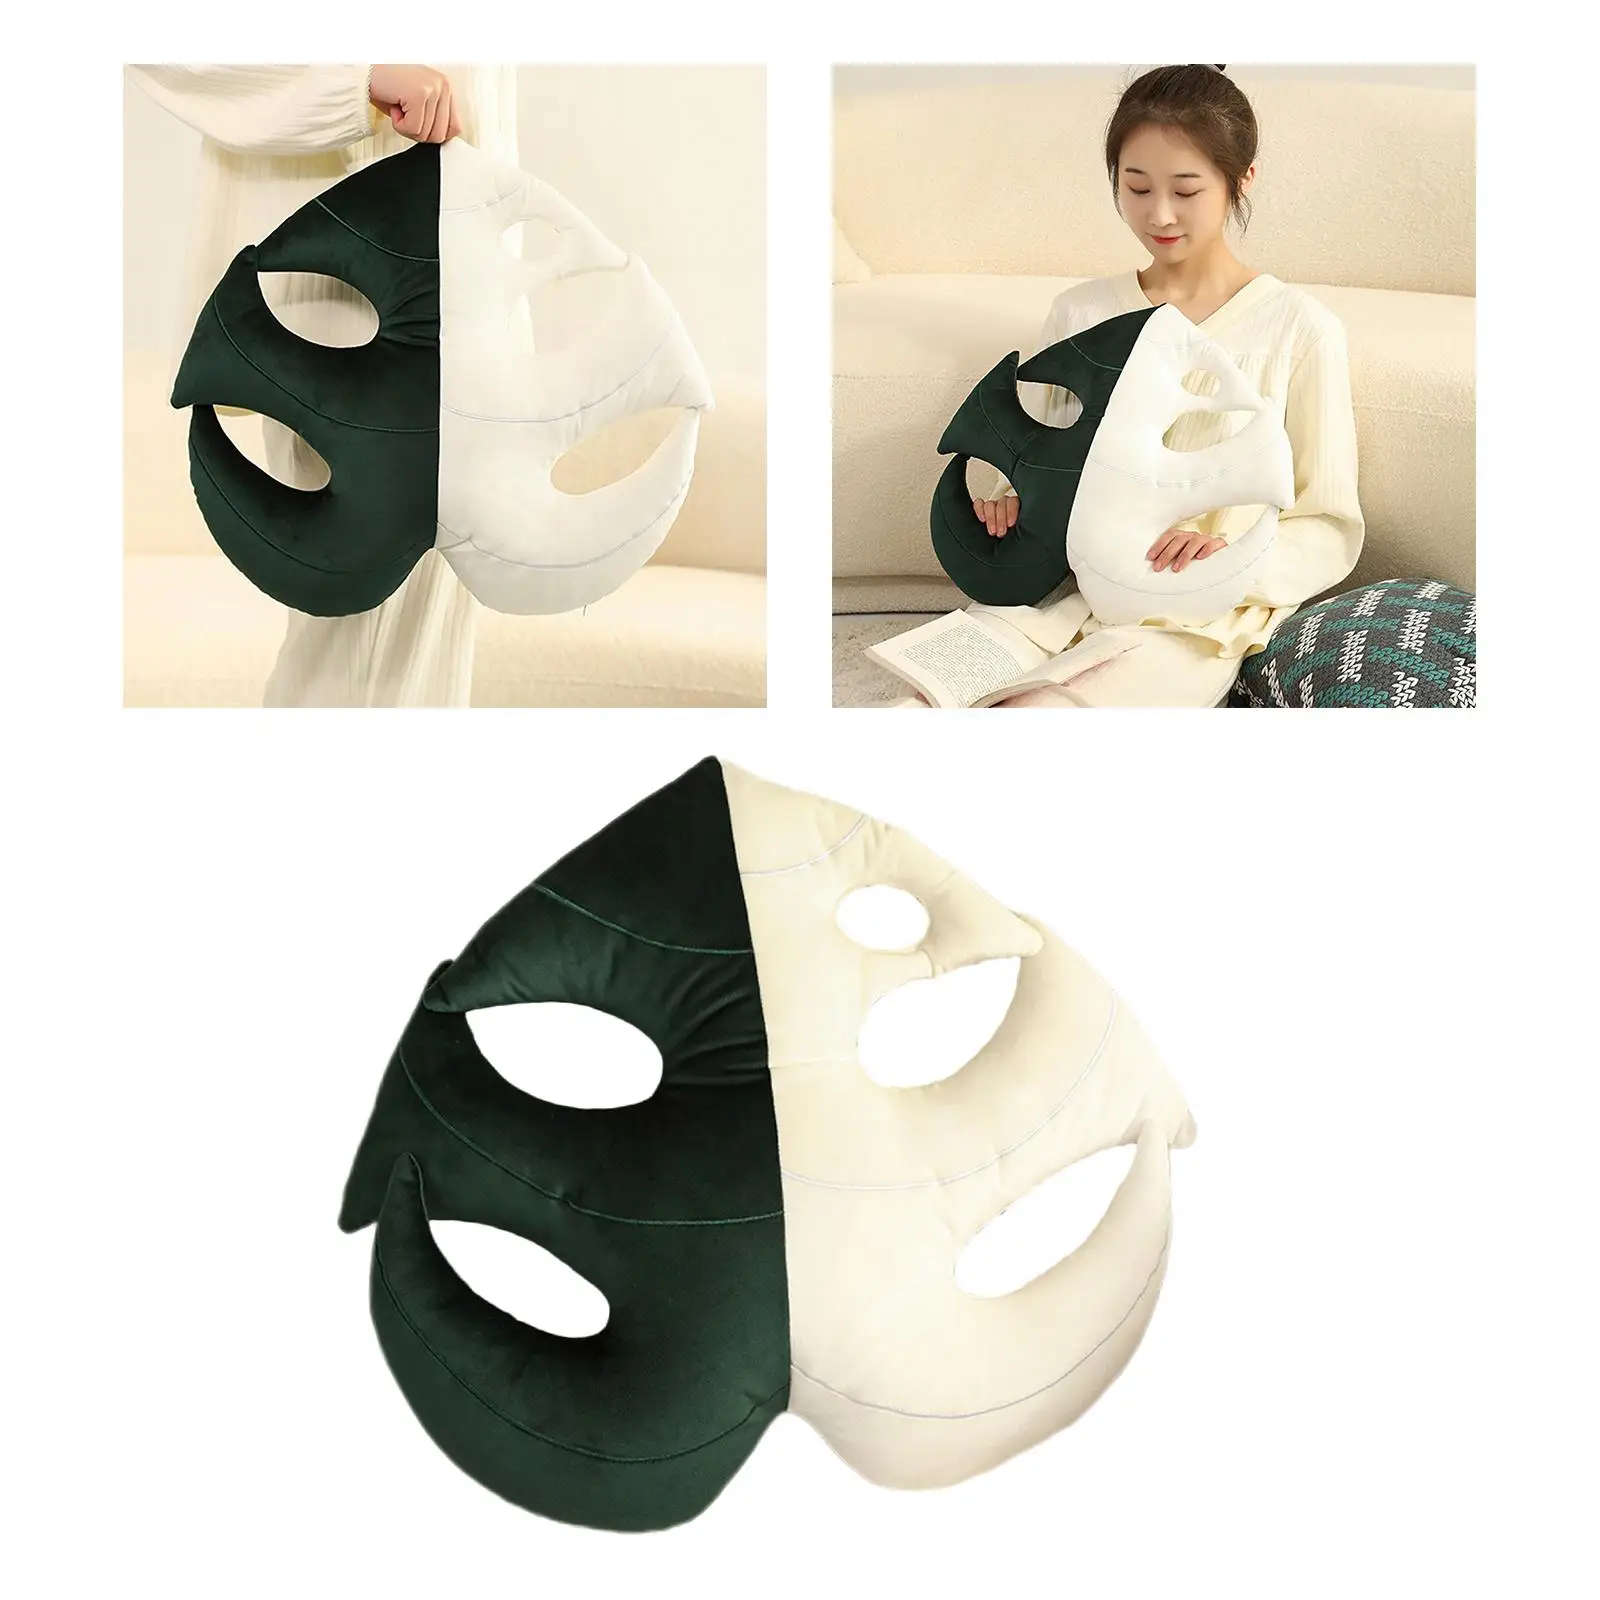  Leaf Shaped Throw  Decorative Filled  for  Nature Room Decor